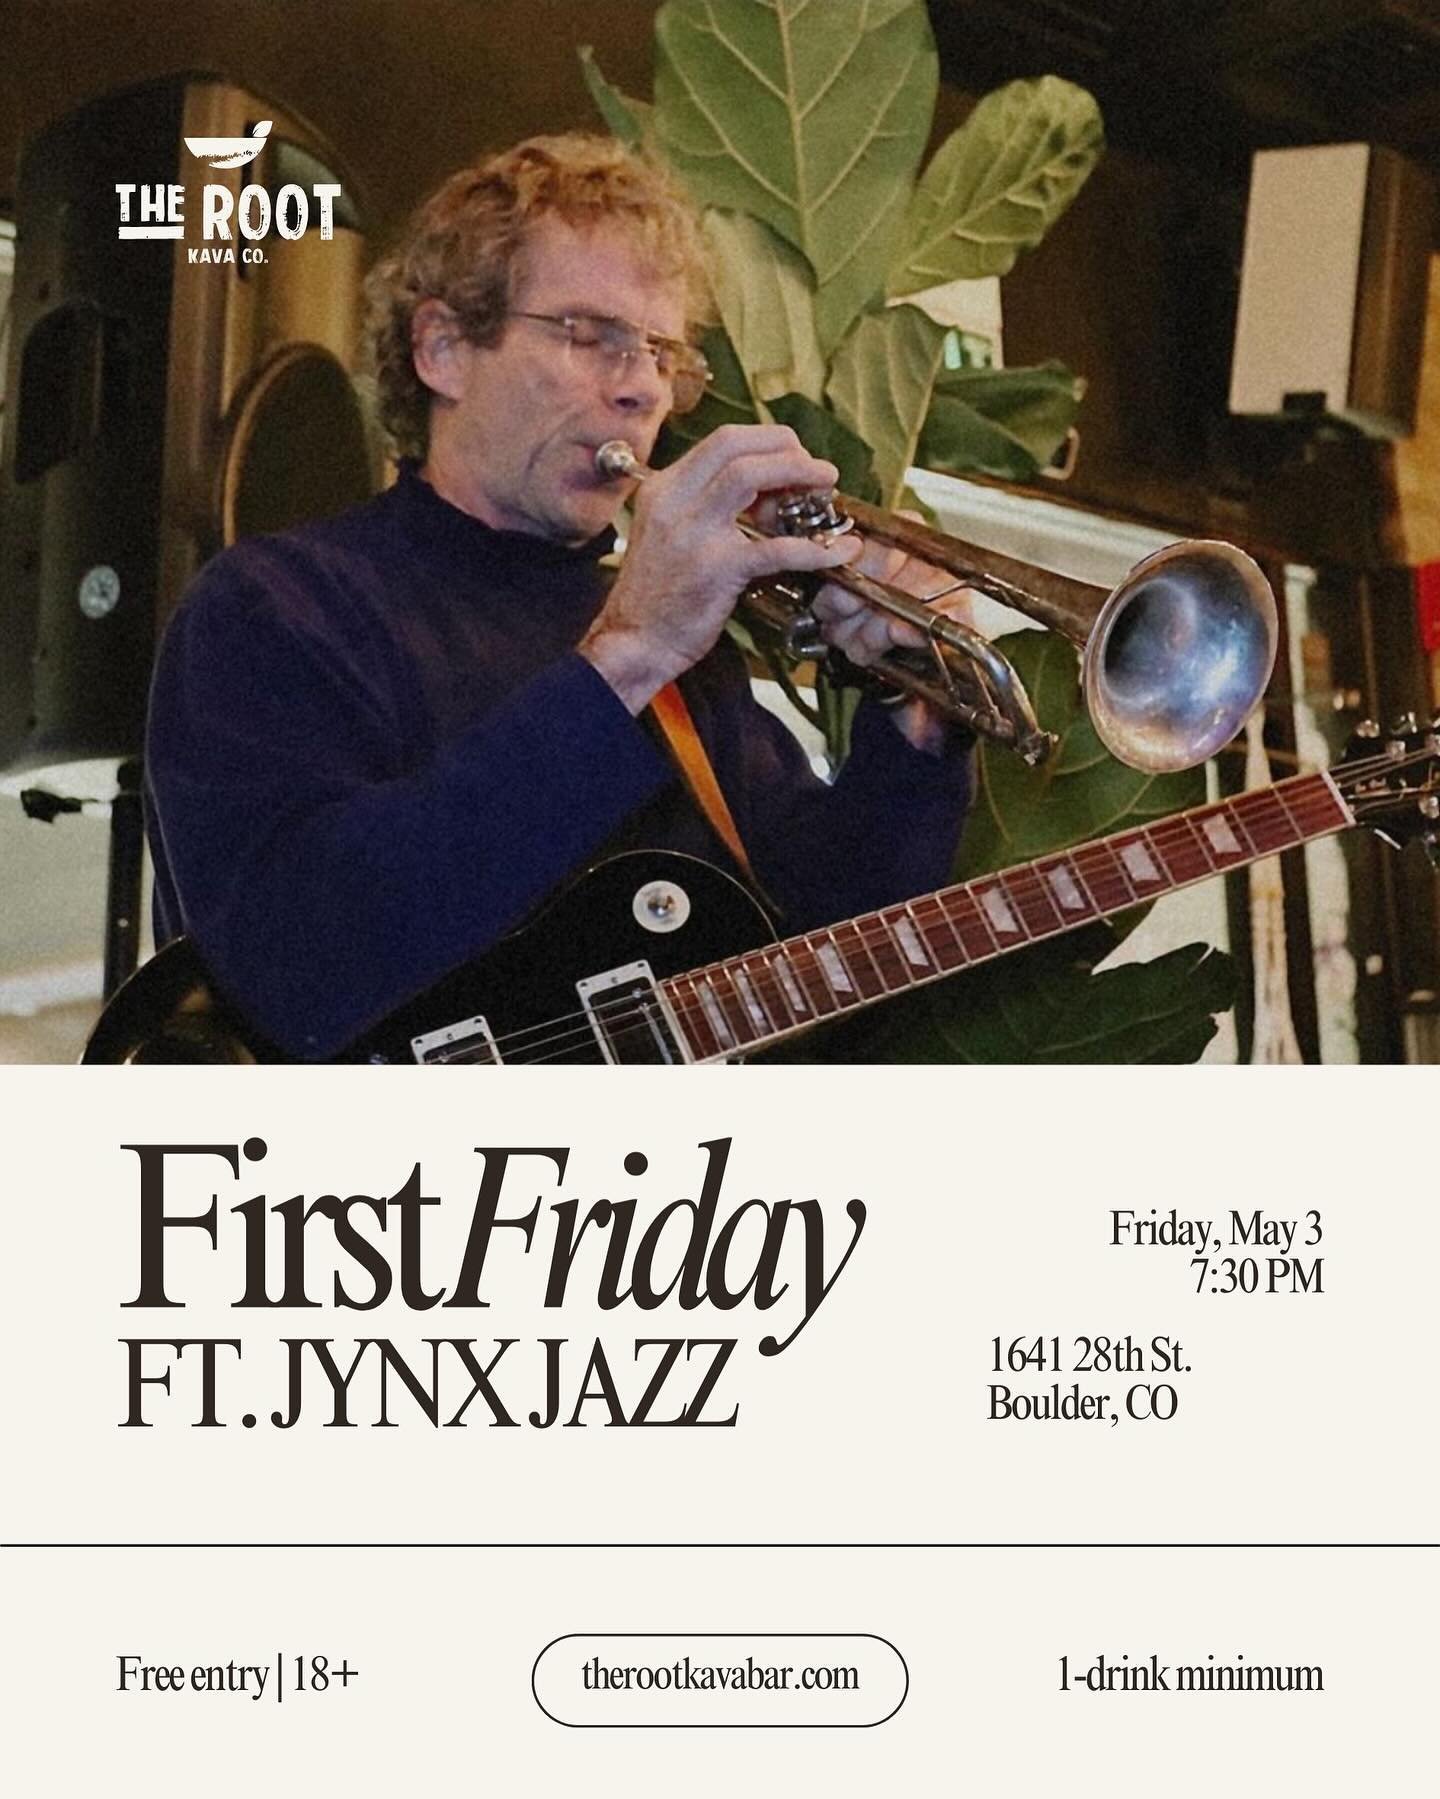 TOMORROW! Come through to enjoy a live performance by @jynx_jazz for First Friday! Be there or be 🟩
.
.
.
#therootkavaco #kavabar #livejazz #firstfriday #bula #bouldermusic #bouldercolorado #bouldernightlife